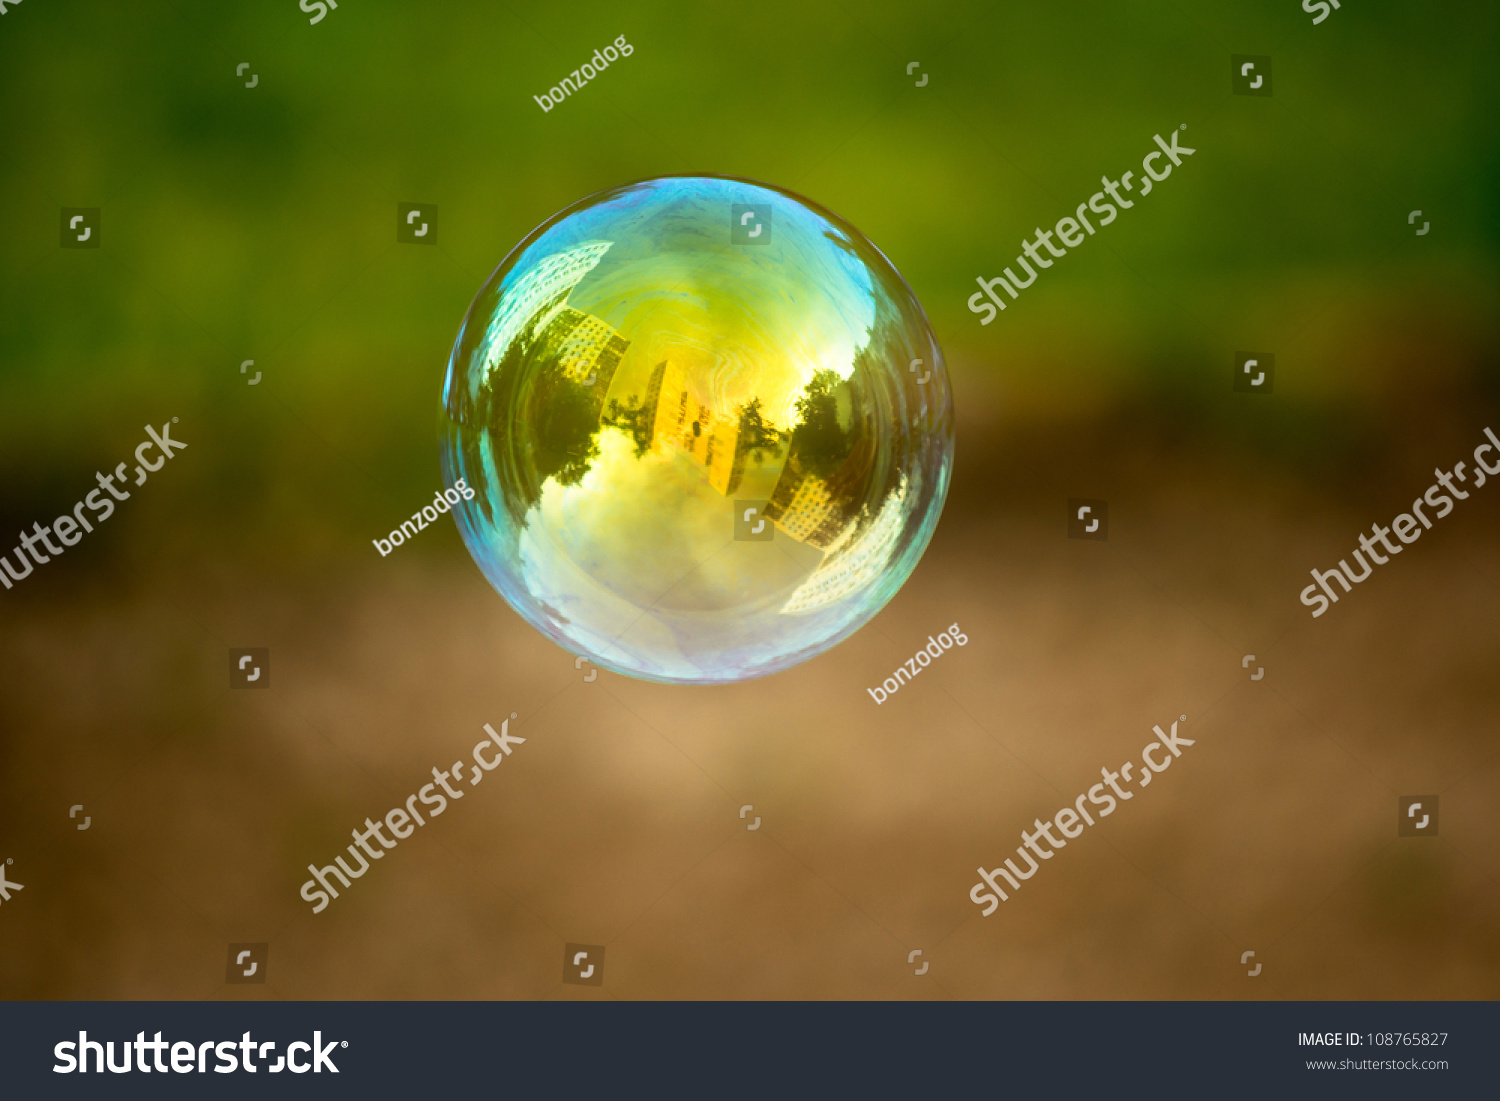 Soap bubble flying. Houses reflected in. #108765827